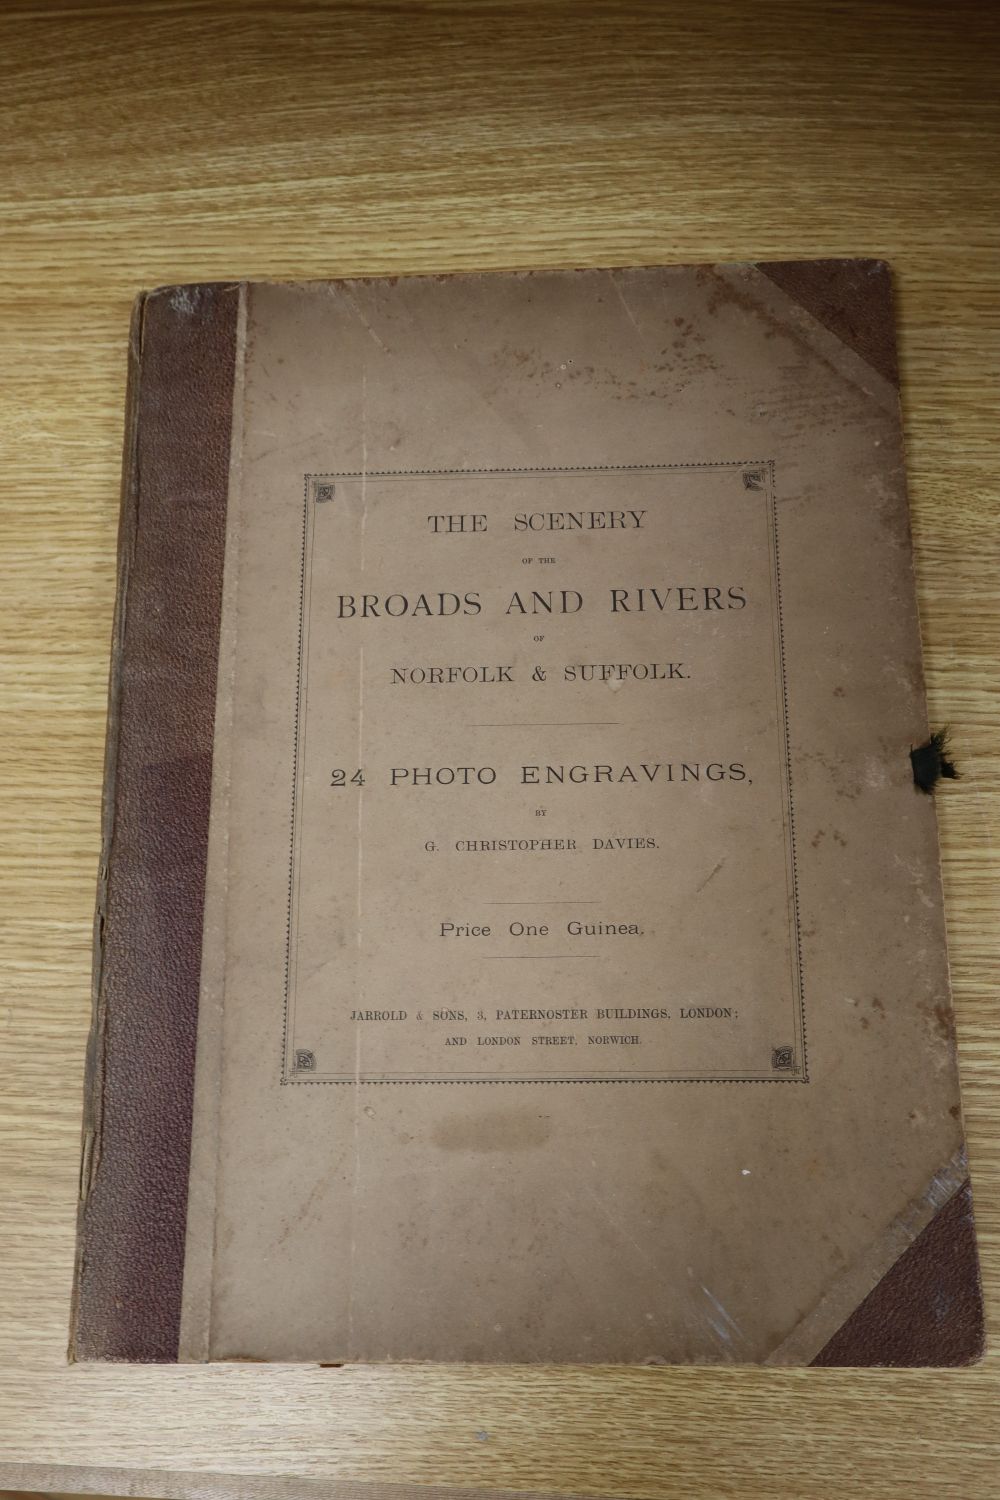 Davies (G. Christopher), The Scenery of the Broads and Rivers of Norfolk and Suffolk,